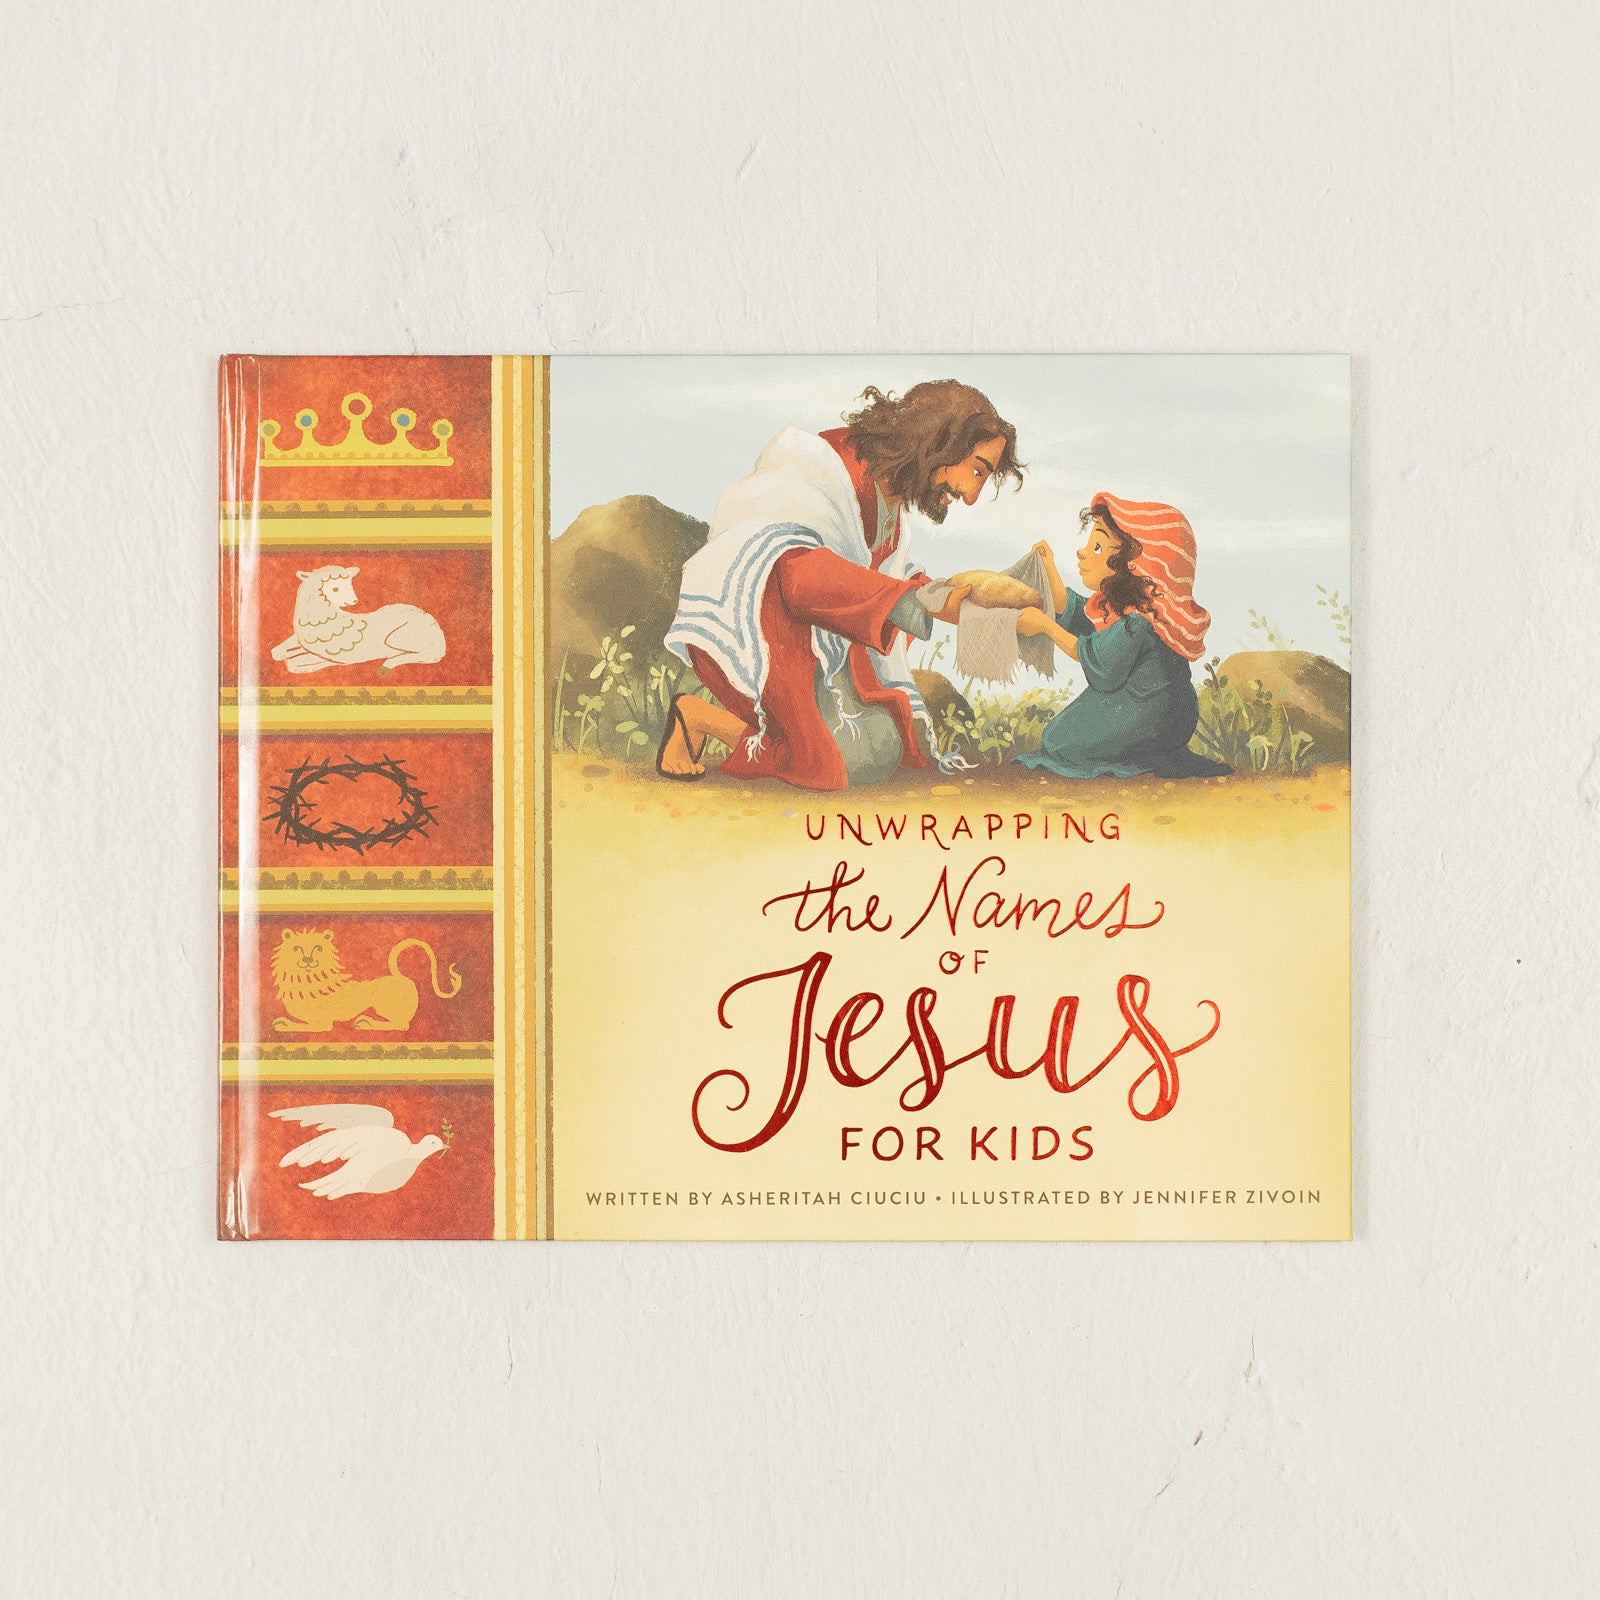 Unwrapping the Names of Jesus: For Kids